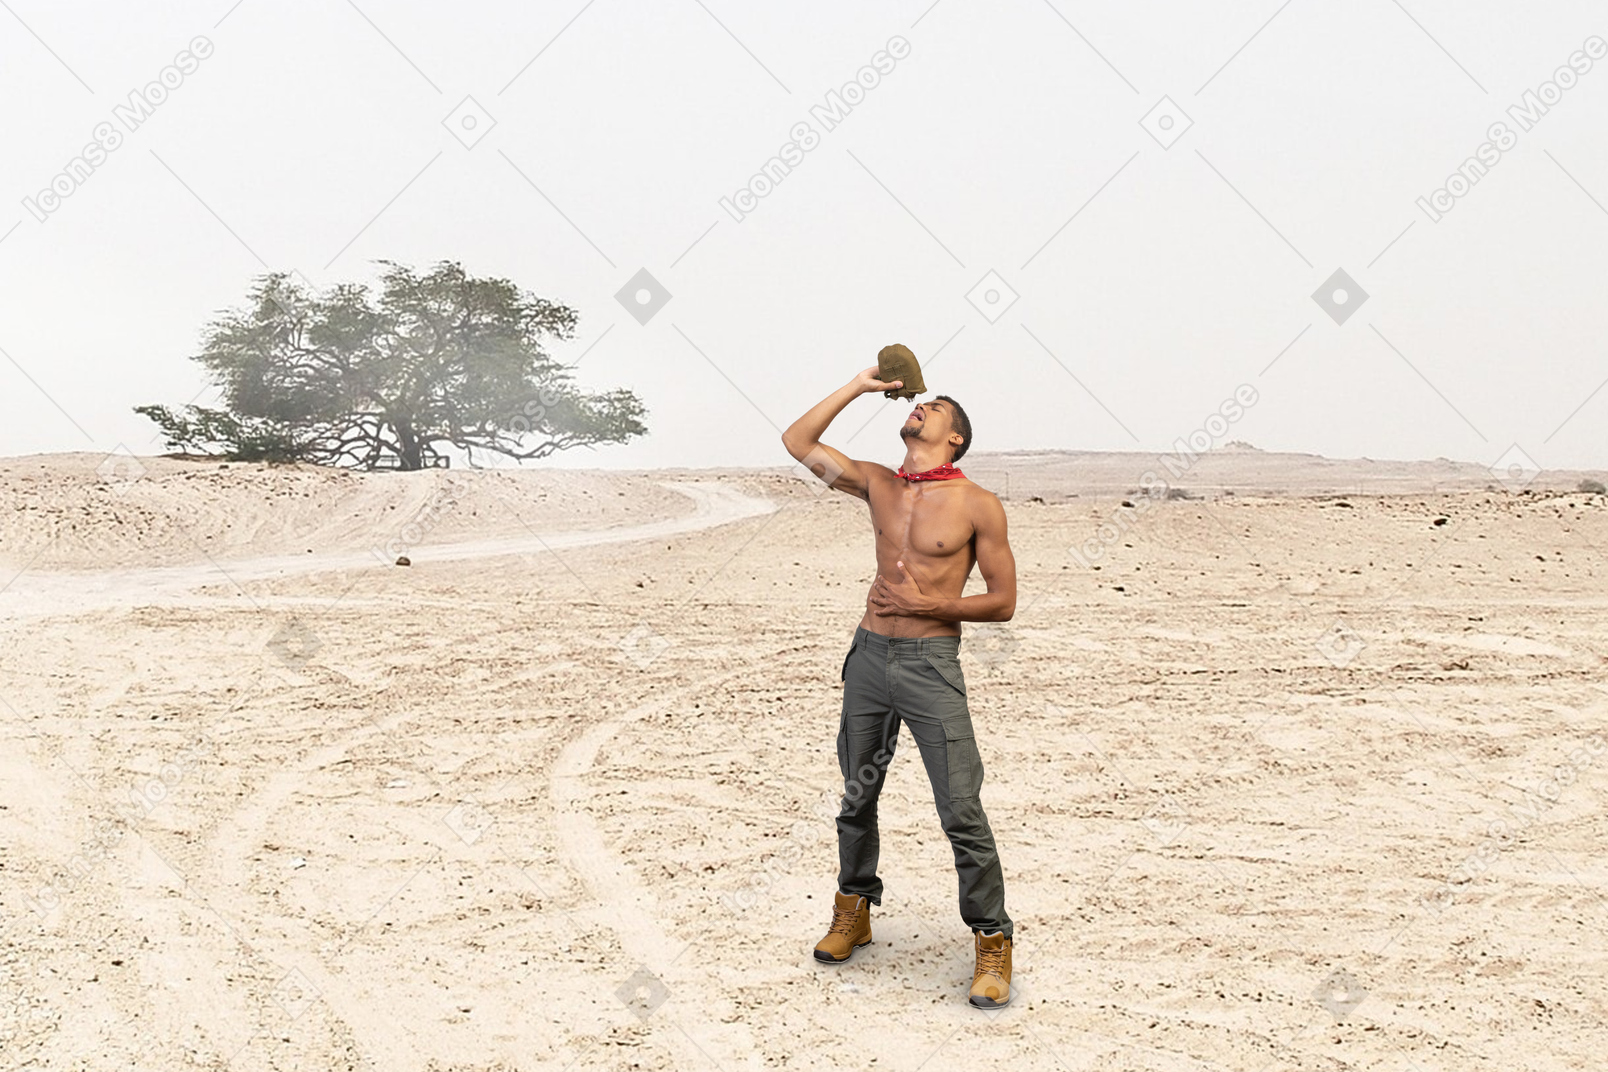 A man standing in the middle of a desert holding a water flask